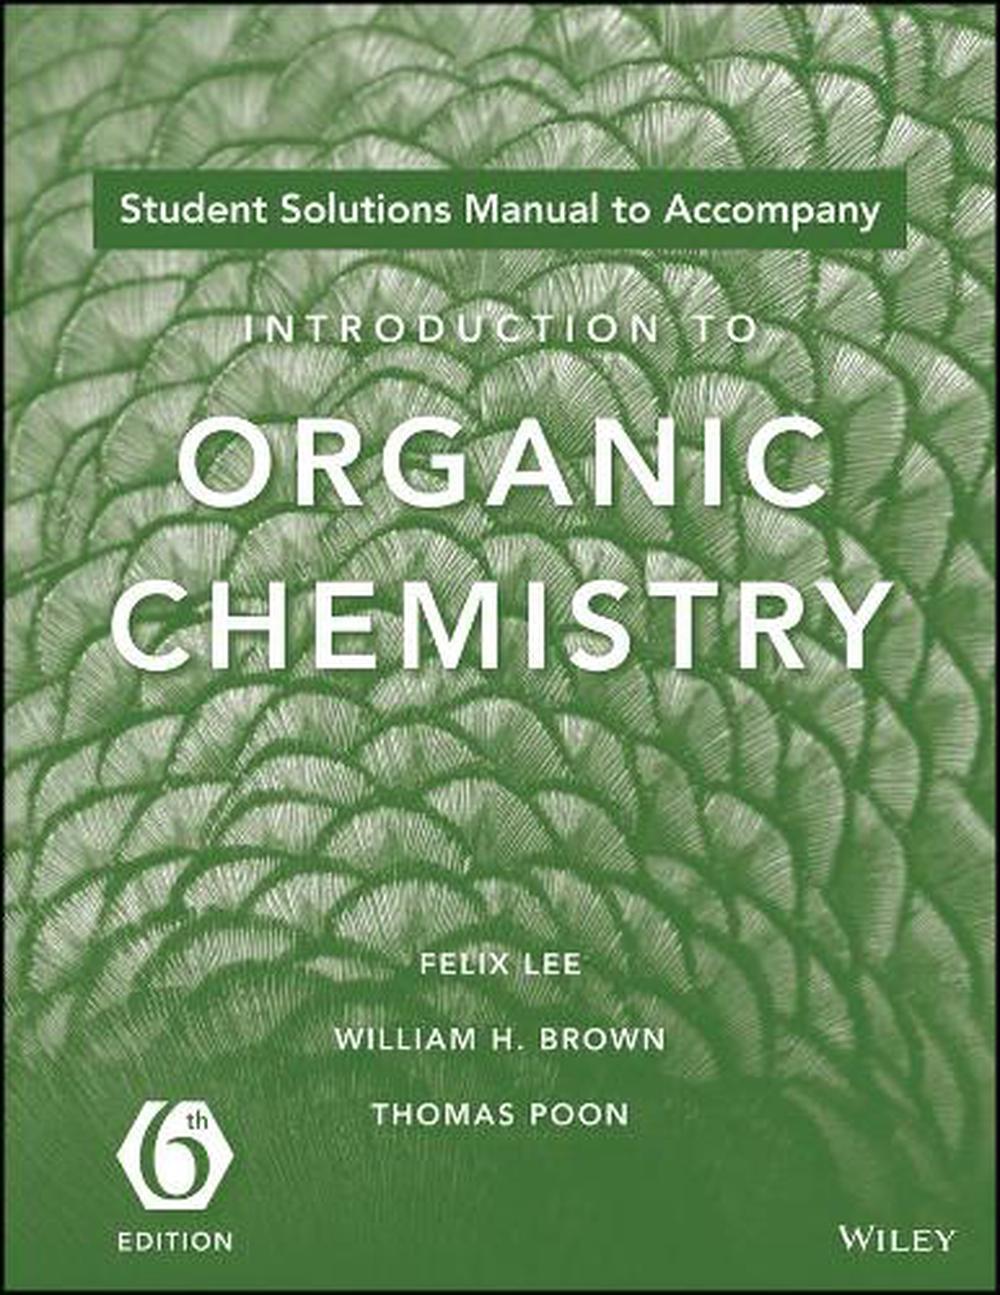 Student Solutions Manual to Introduction to Organic Chemistry, 6th Edition by William